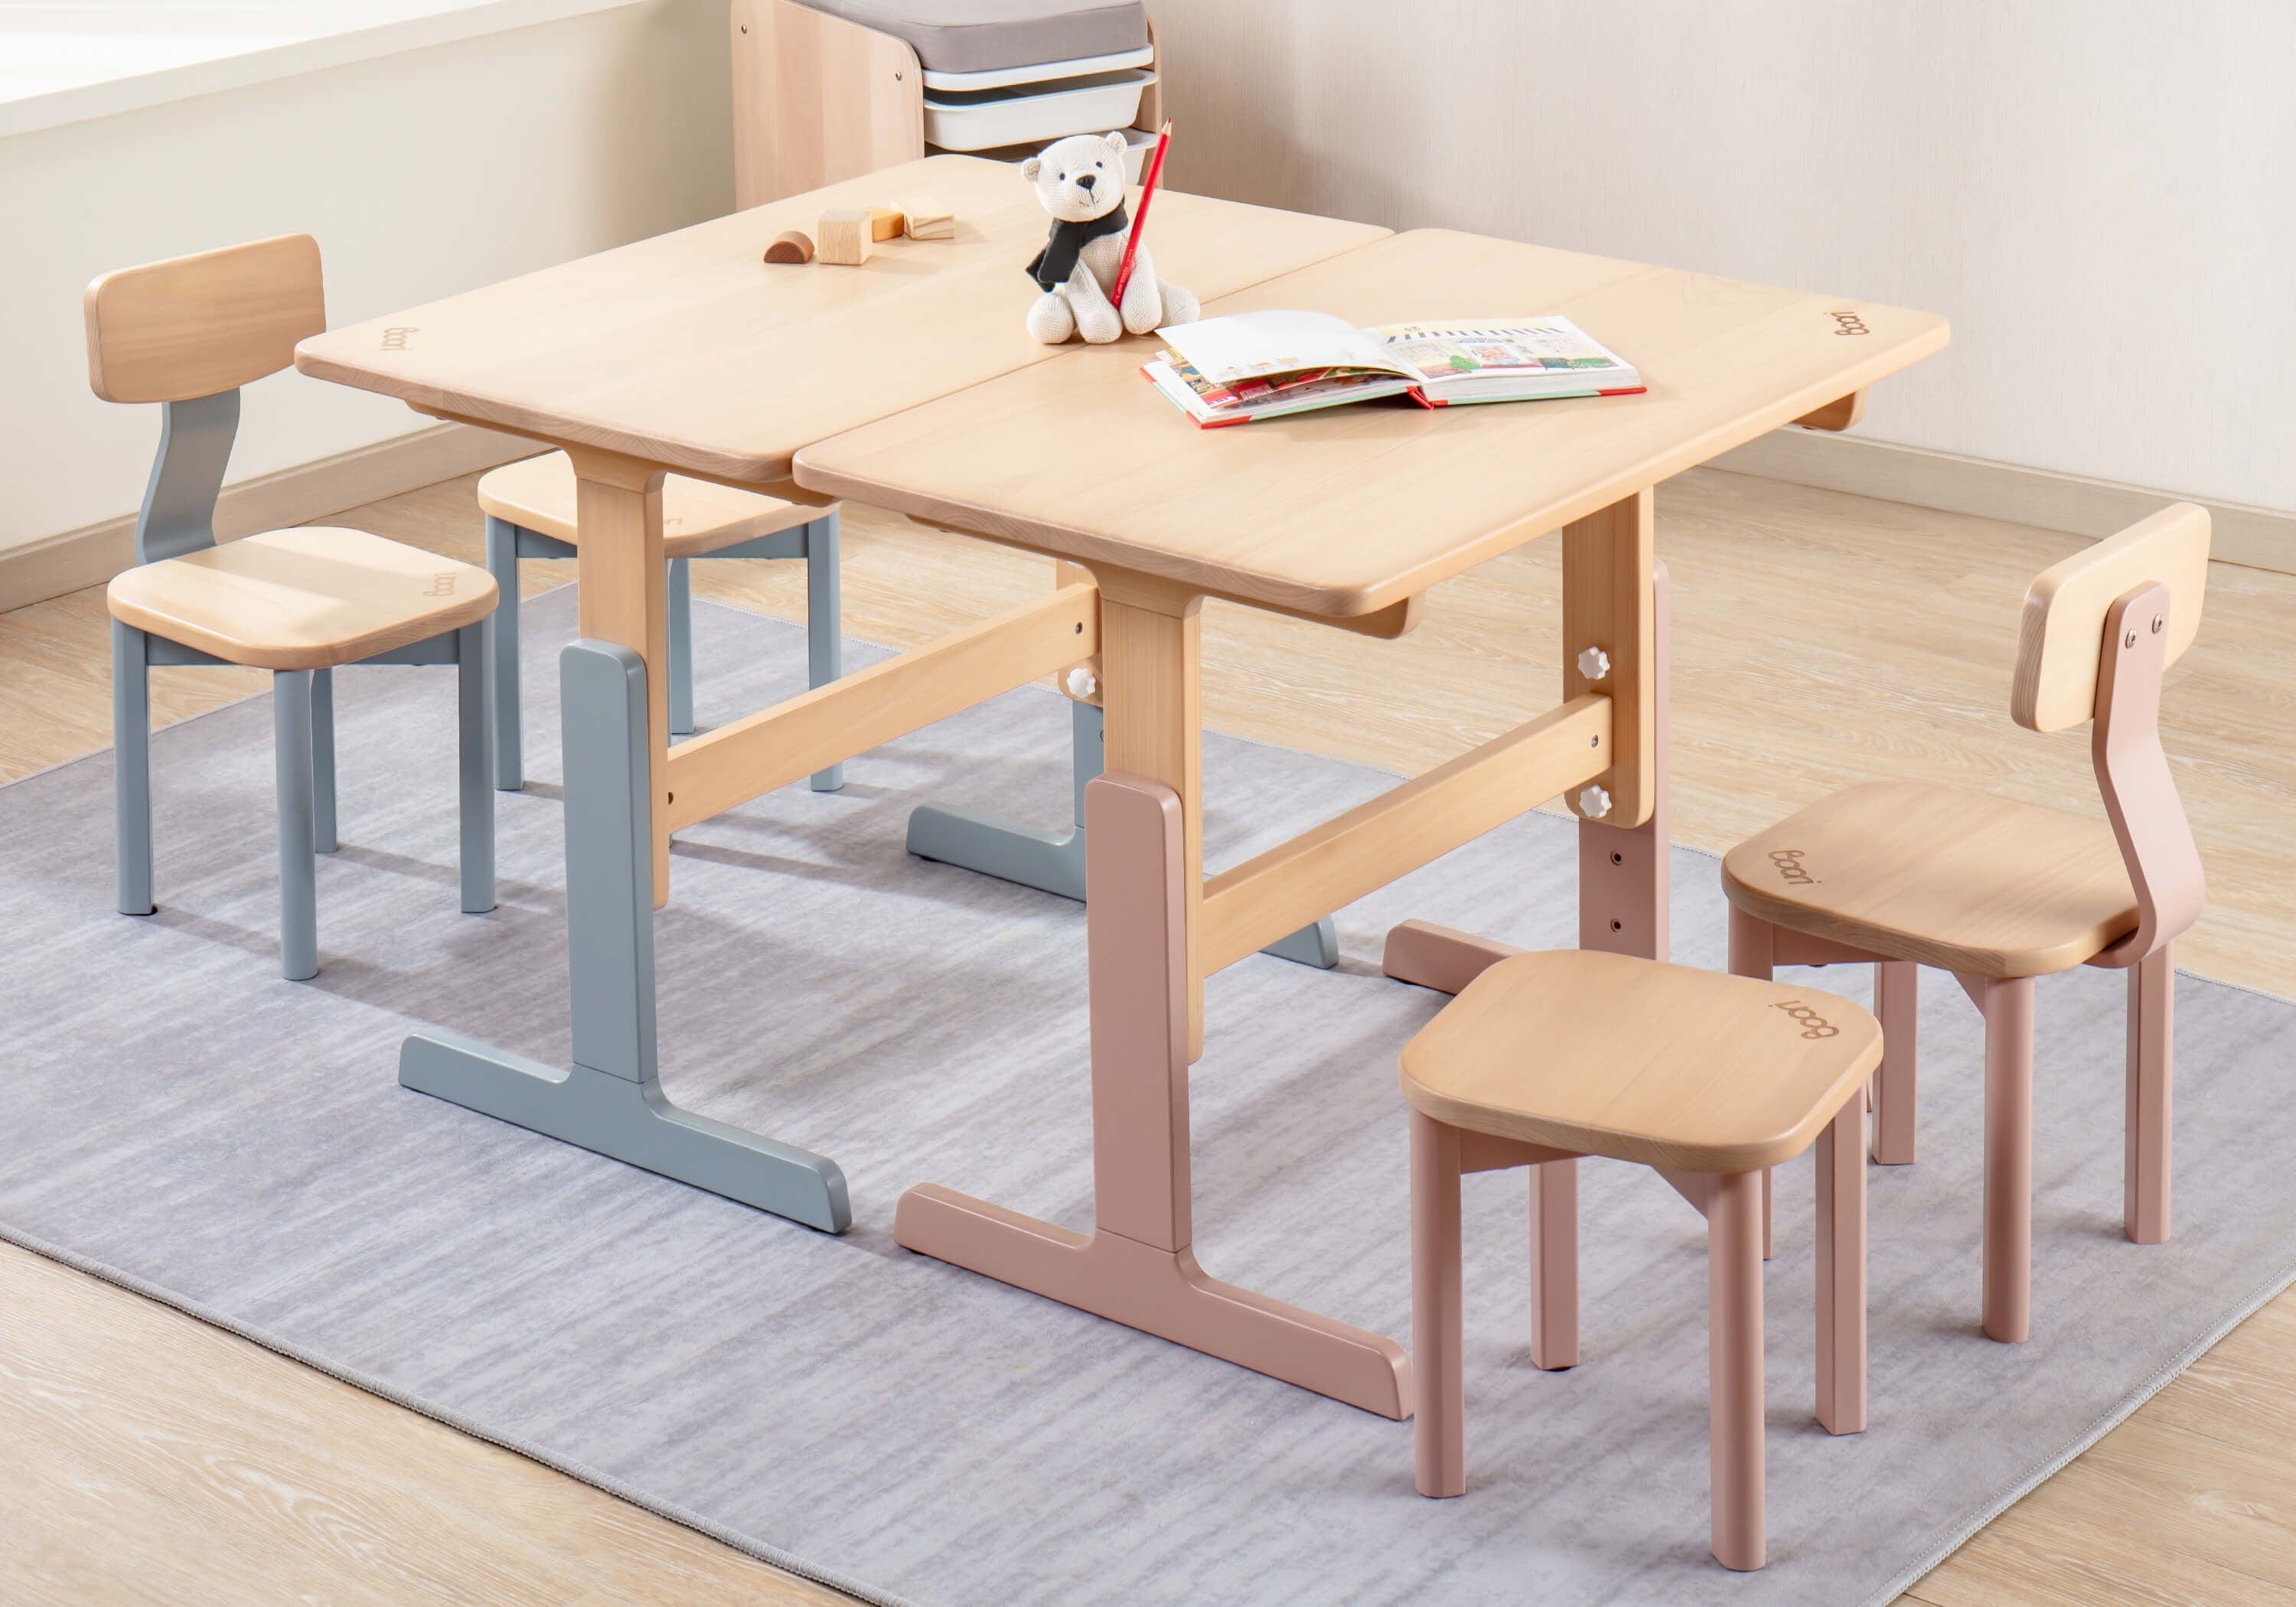 Boori Table & Chairs Boori Tidy Learning Table & Chair Bundle - Direct Delivery